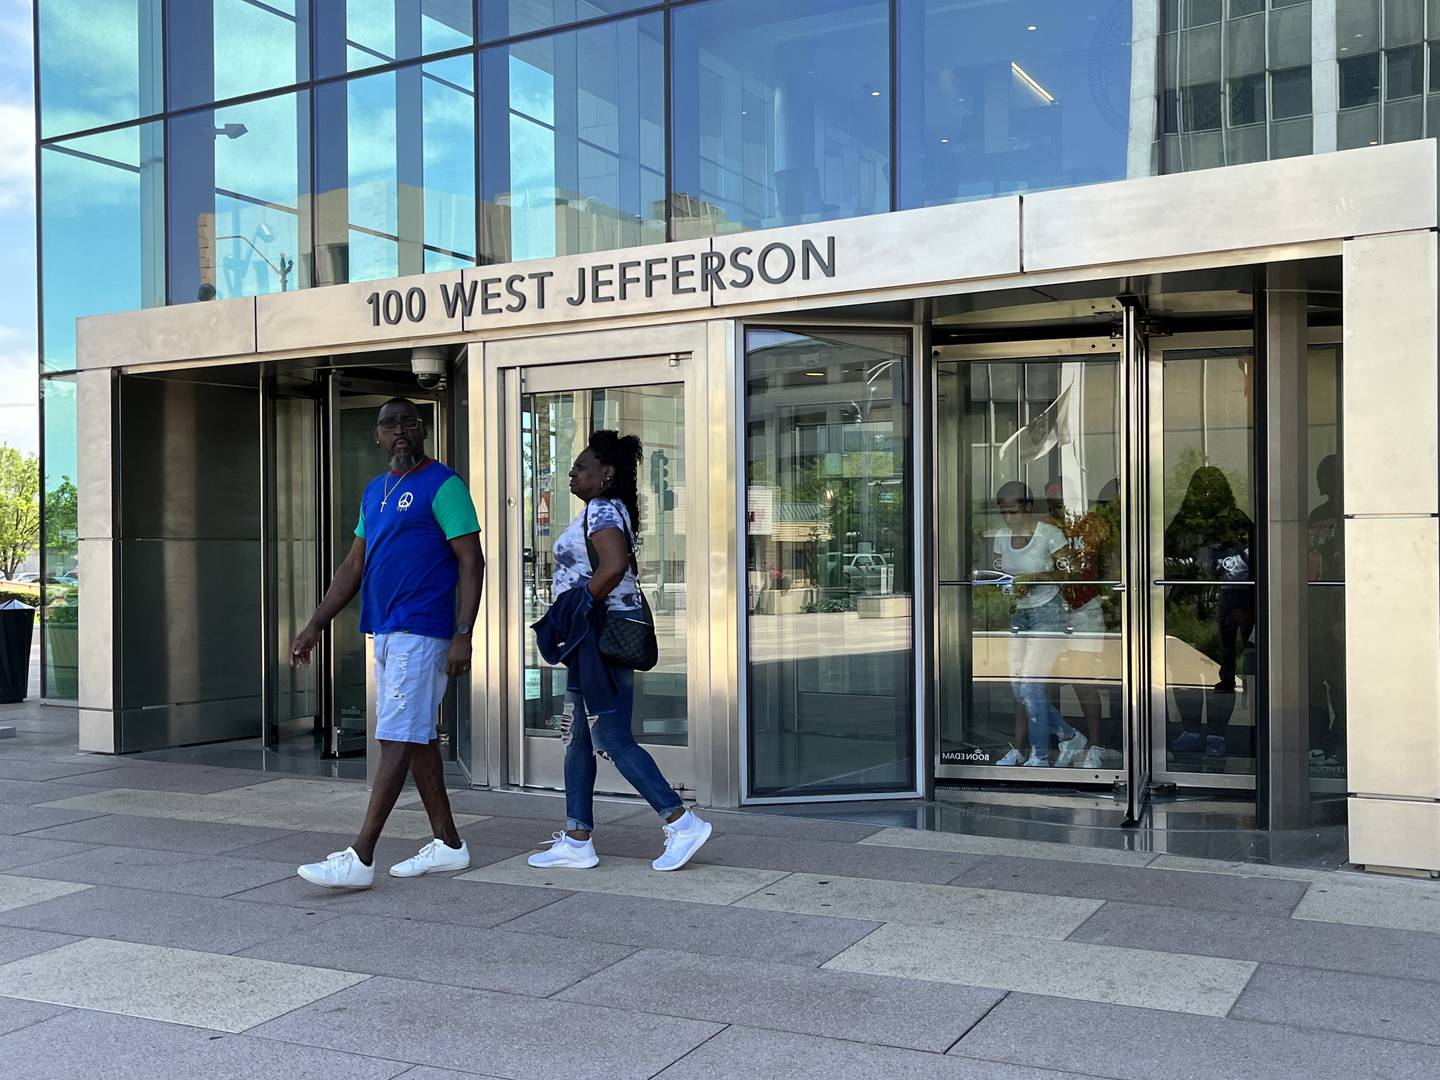 Michael Woods (left), father of Quentin Woods, 38, who was shot and killed in 2019, leaves the Will County Courthouse on Tuesday, May 16, 2023, in Joliet. Matthew Rutledge, 41, has been charged with the 2019 first-degree murder of Quentin Woods and the attempted murder of his sister, Tiffany Williams, 38.